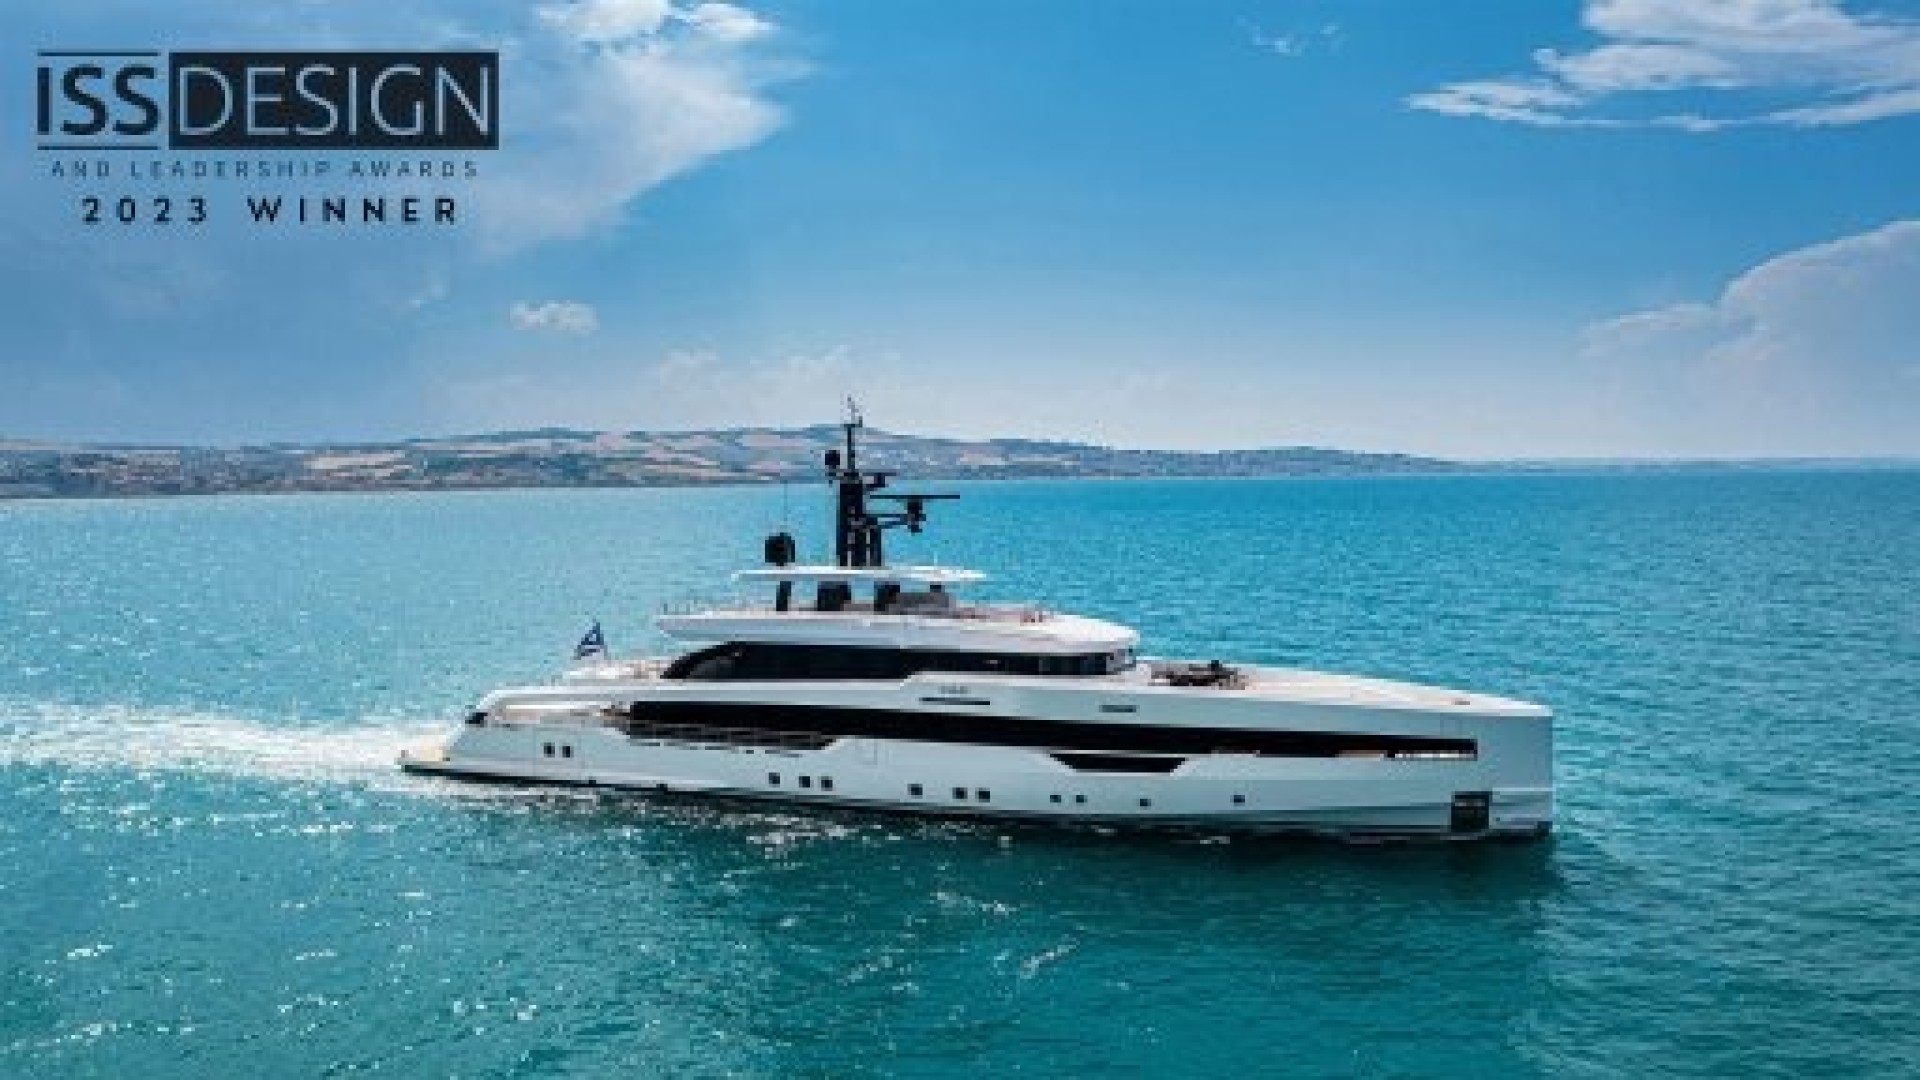 CRN M/Y Ciao wins at the 2023 ISS Design and Leadership Awards